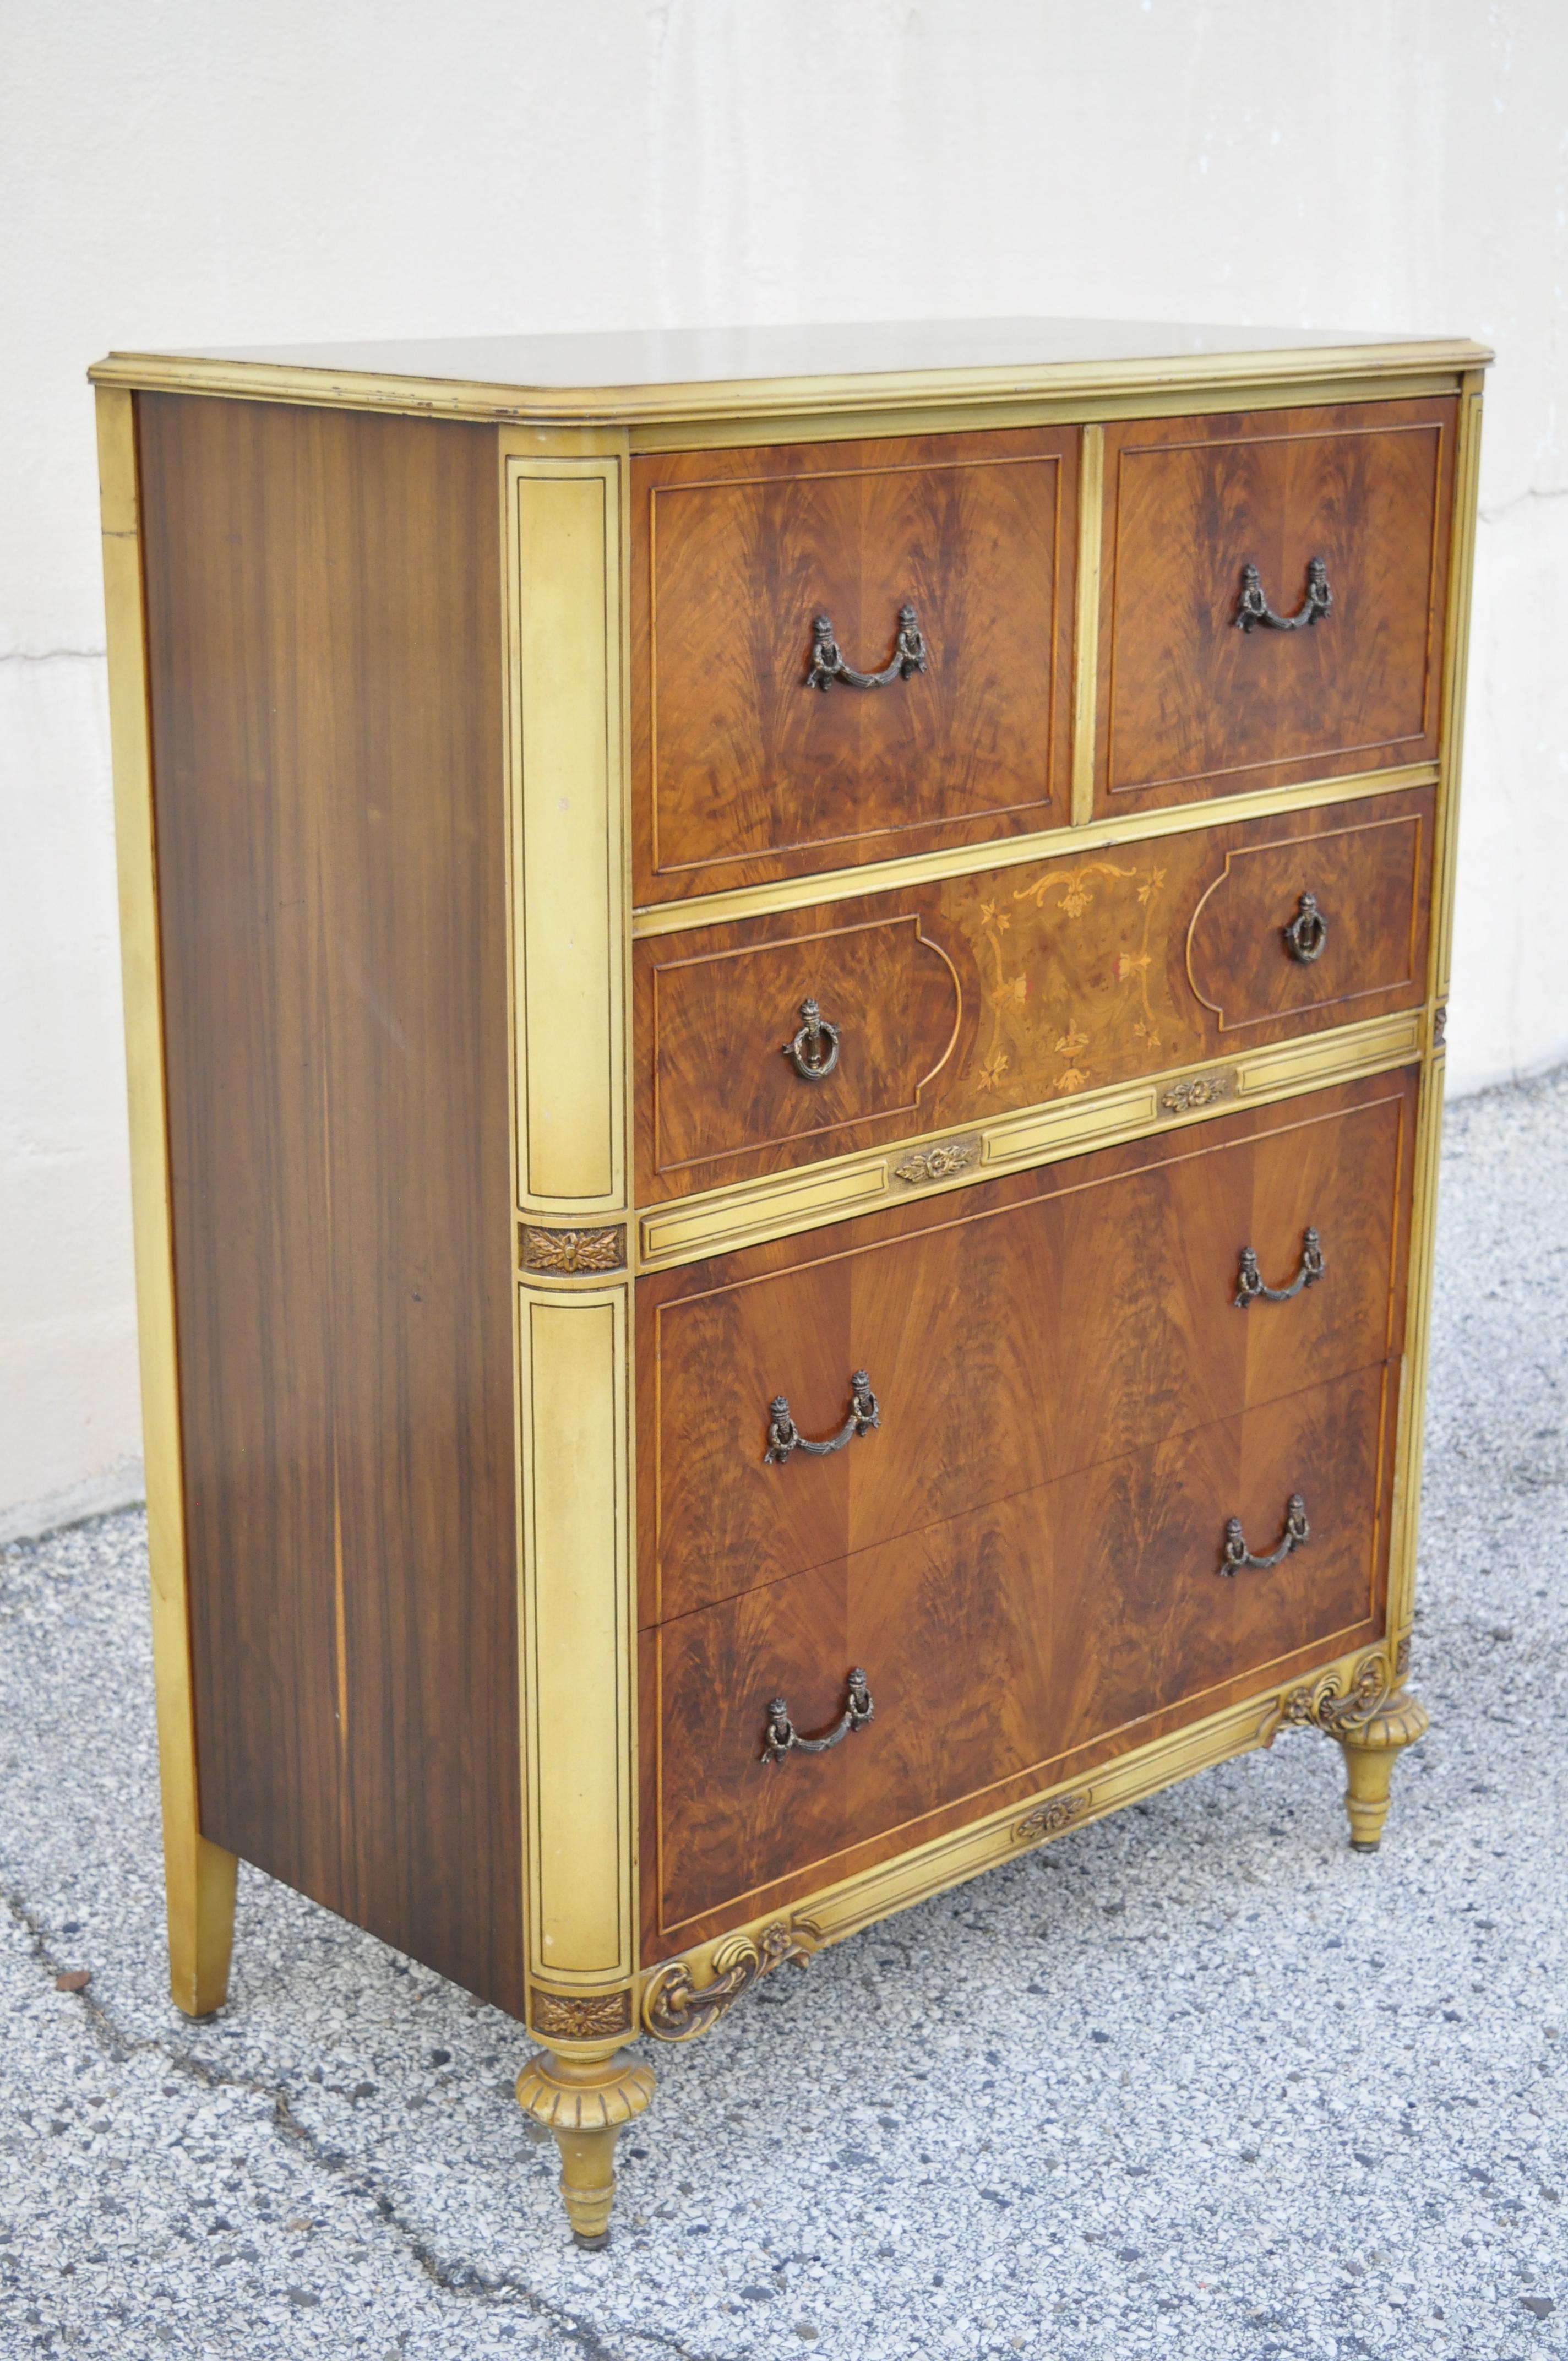 Antique French Louis XVI XV style mahogany satinwood inlay tall chest dresser. Item features satinwood floral inlay, beautiful wood grain, 4 dovetailed drawers, carved cabriole legs, solid brass hardware, quality American craftsmanship, circa early